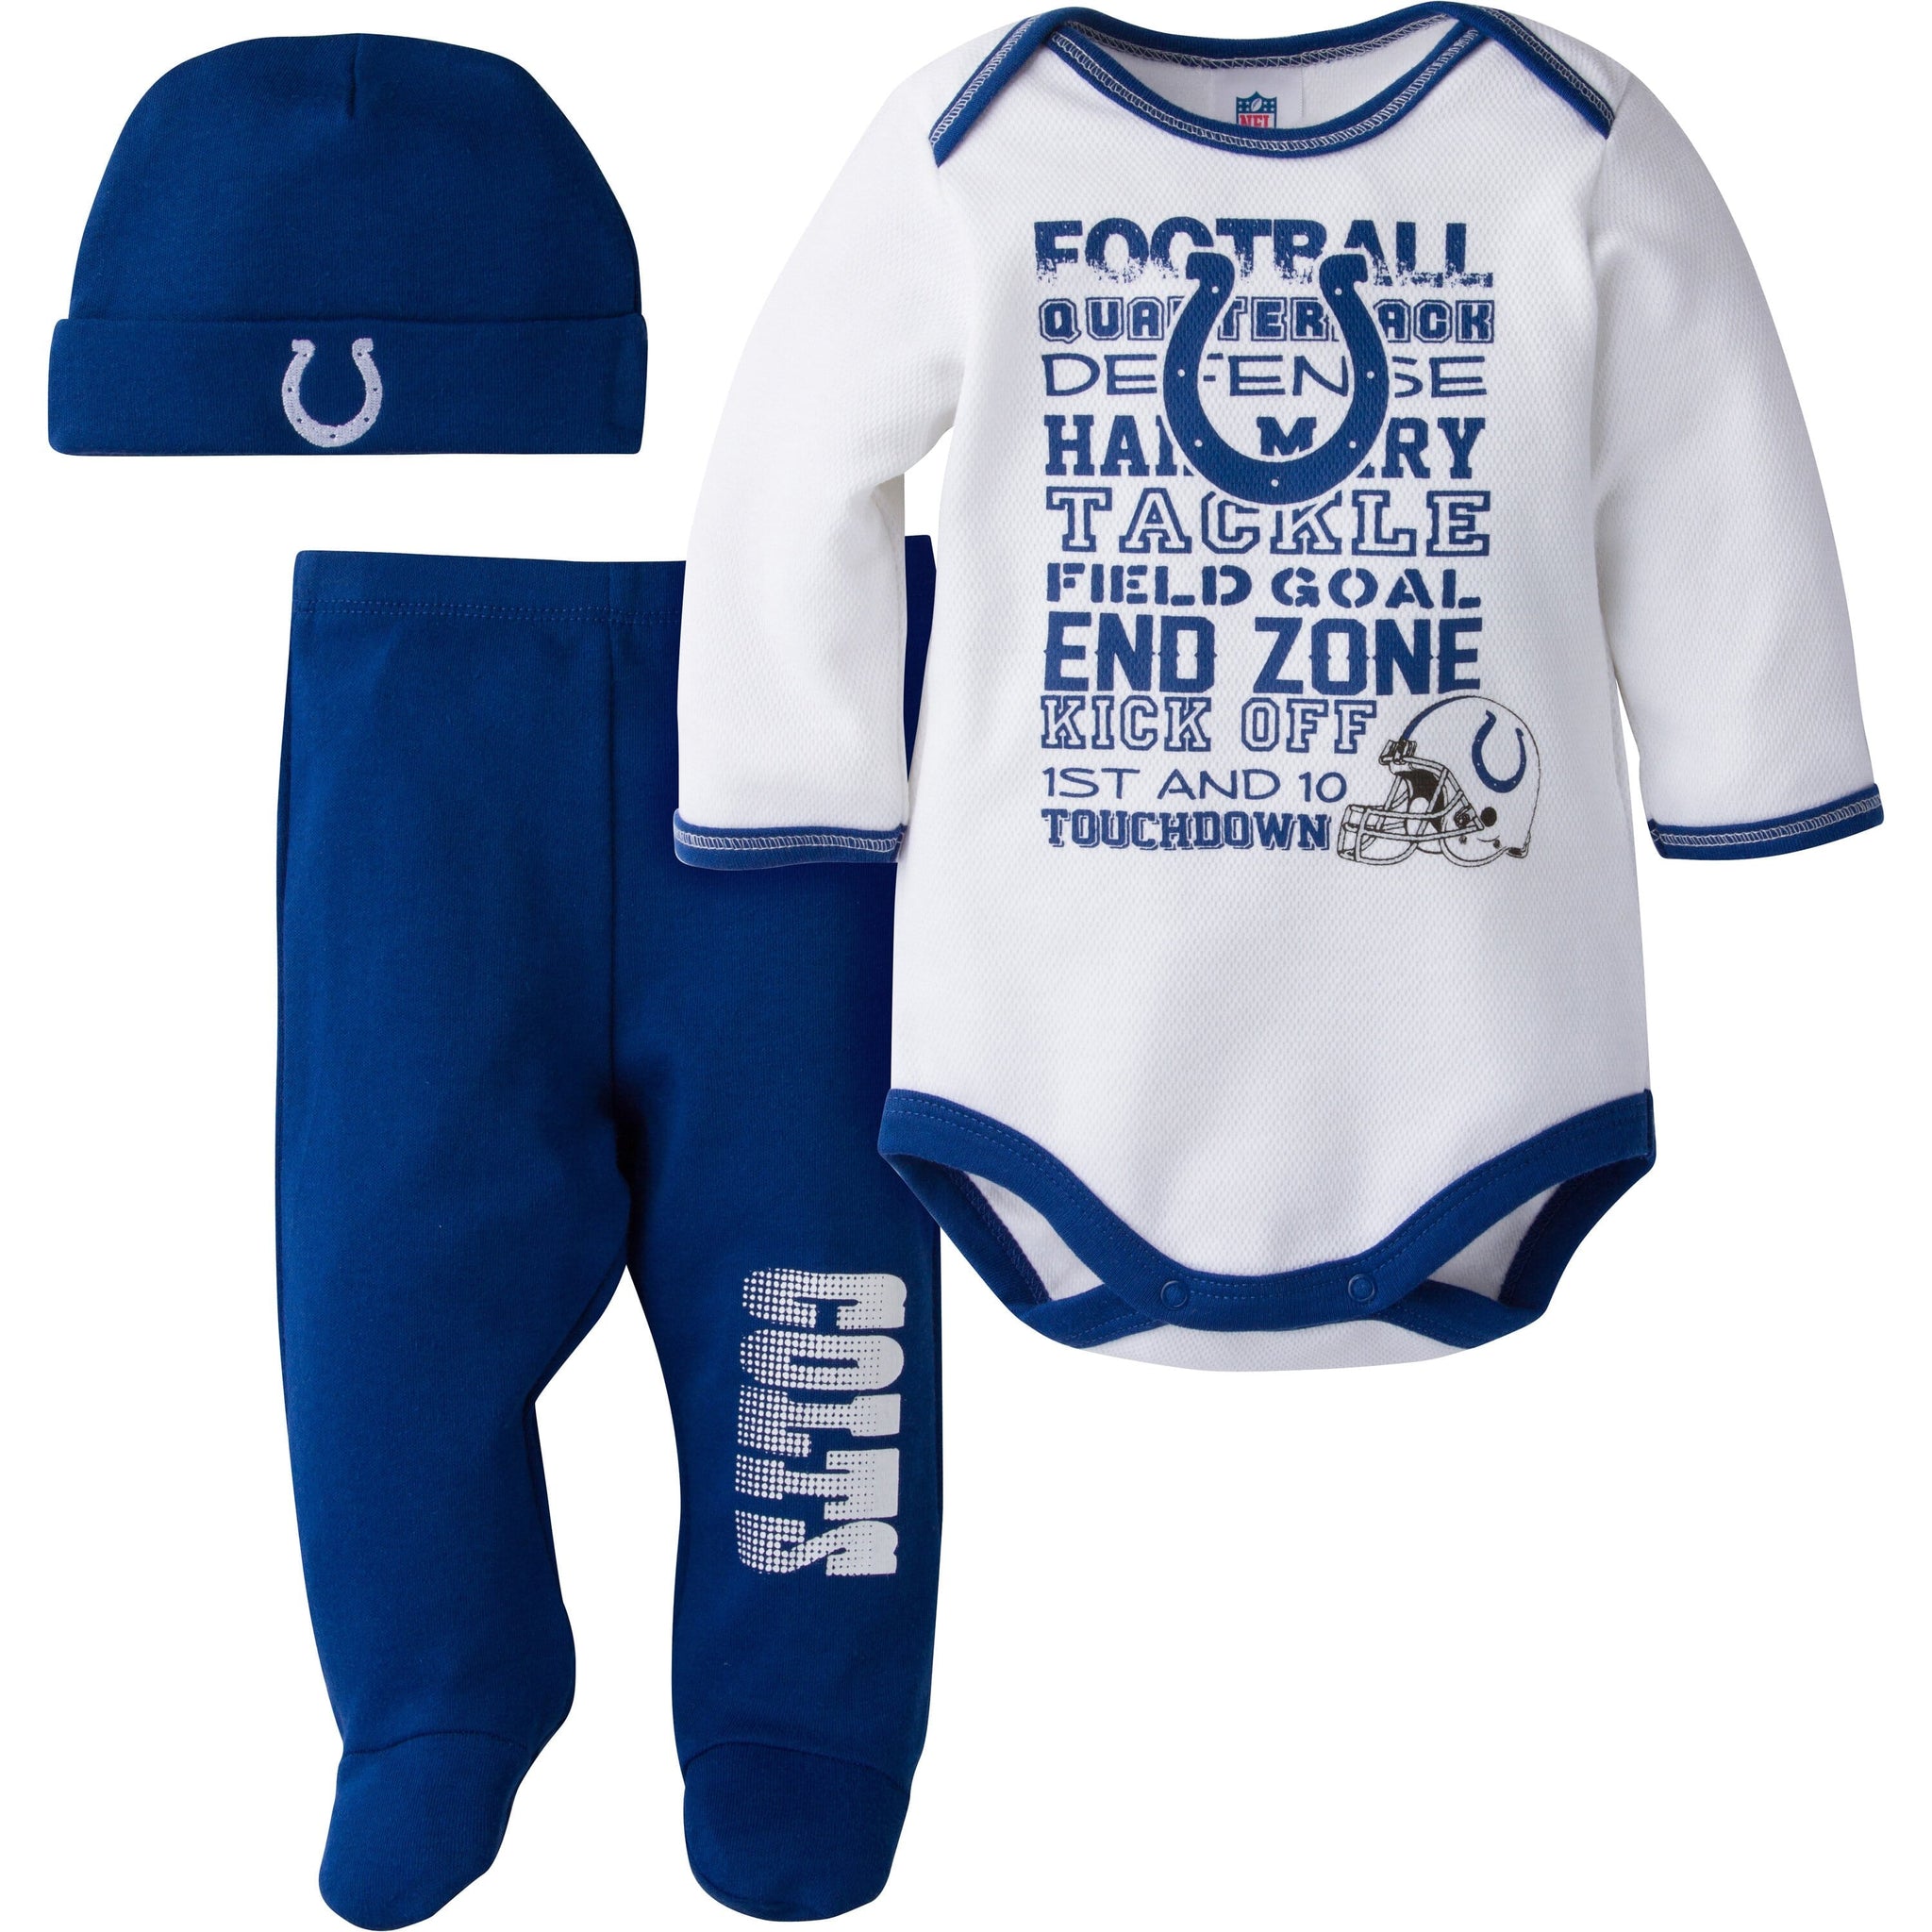 baby colts jersey